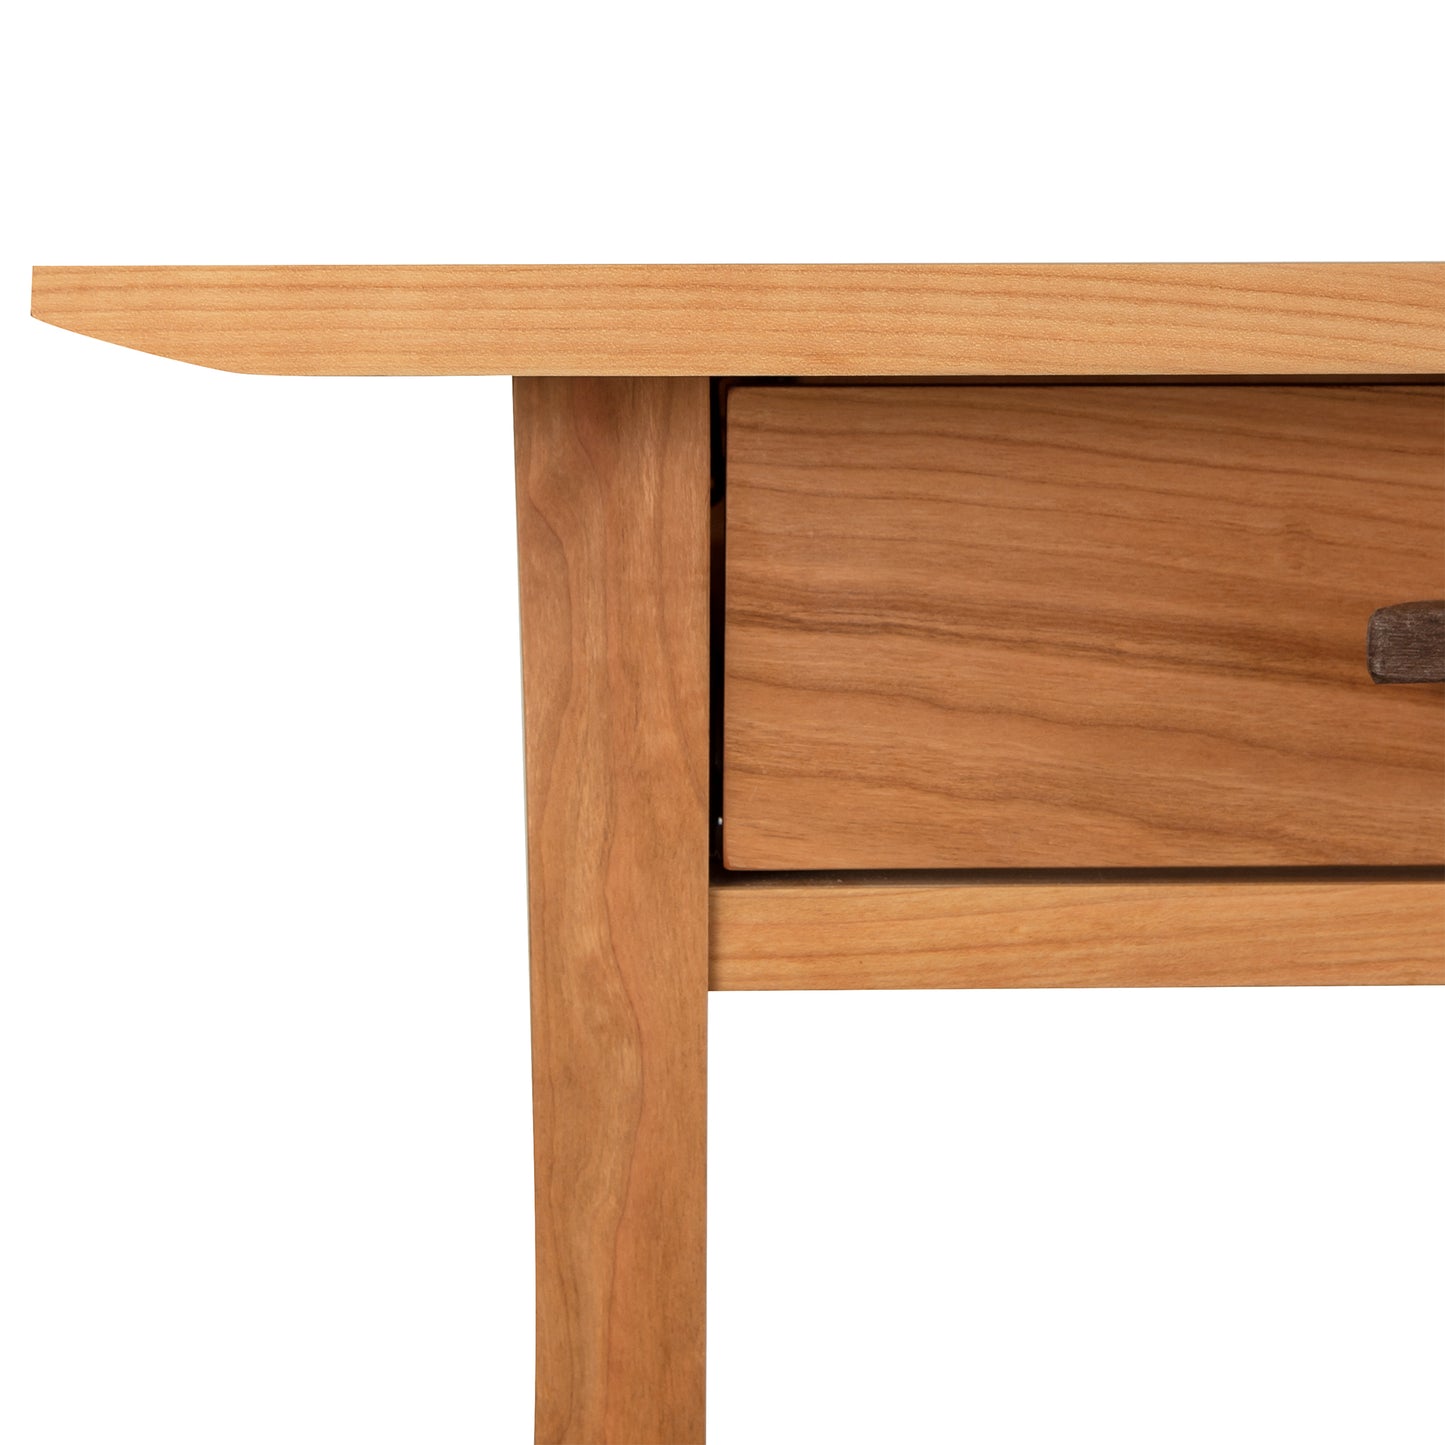 Close-up of a Vermont Furniture Designs Contemporary Craftsman Library Desk corner with a single drawer, showcasing the wood grain and carpentry details.